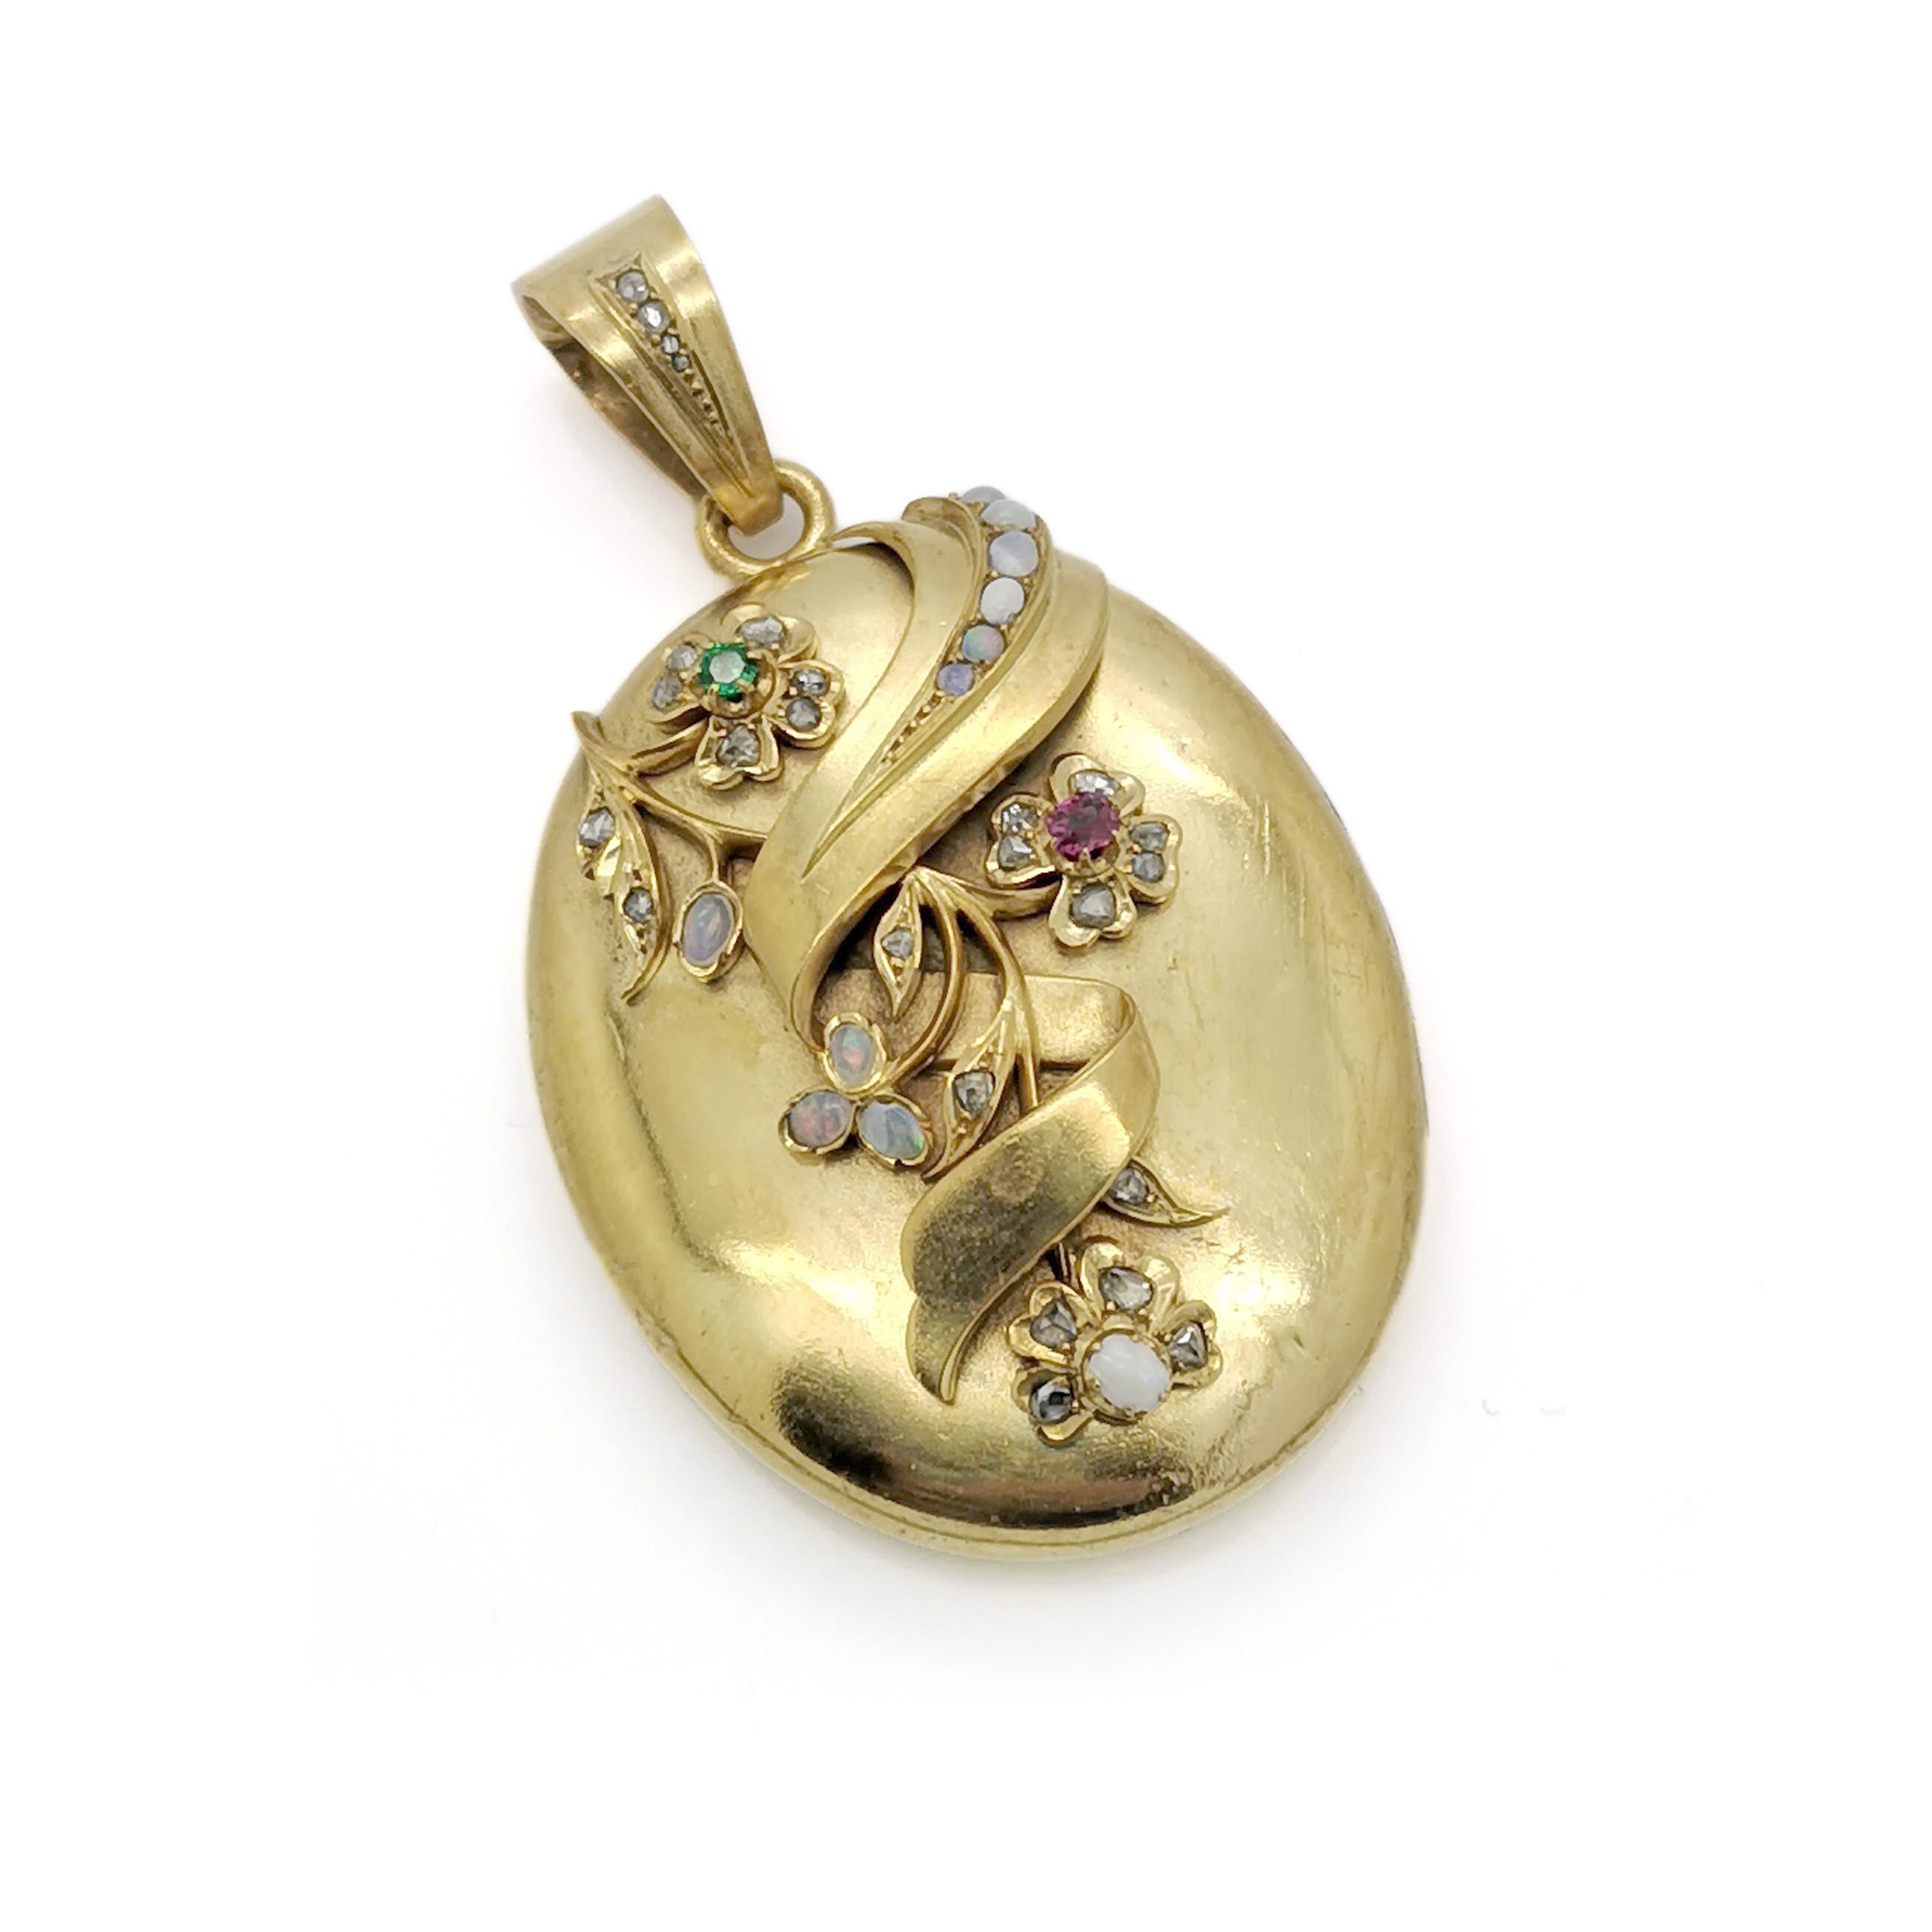 A Victorian gold and gem set locket, the oval locket set with opals, a ruby and an emerald in a flower motif, opening to two compartments. Circa 1875.